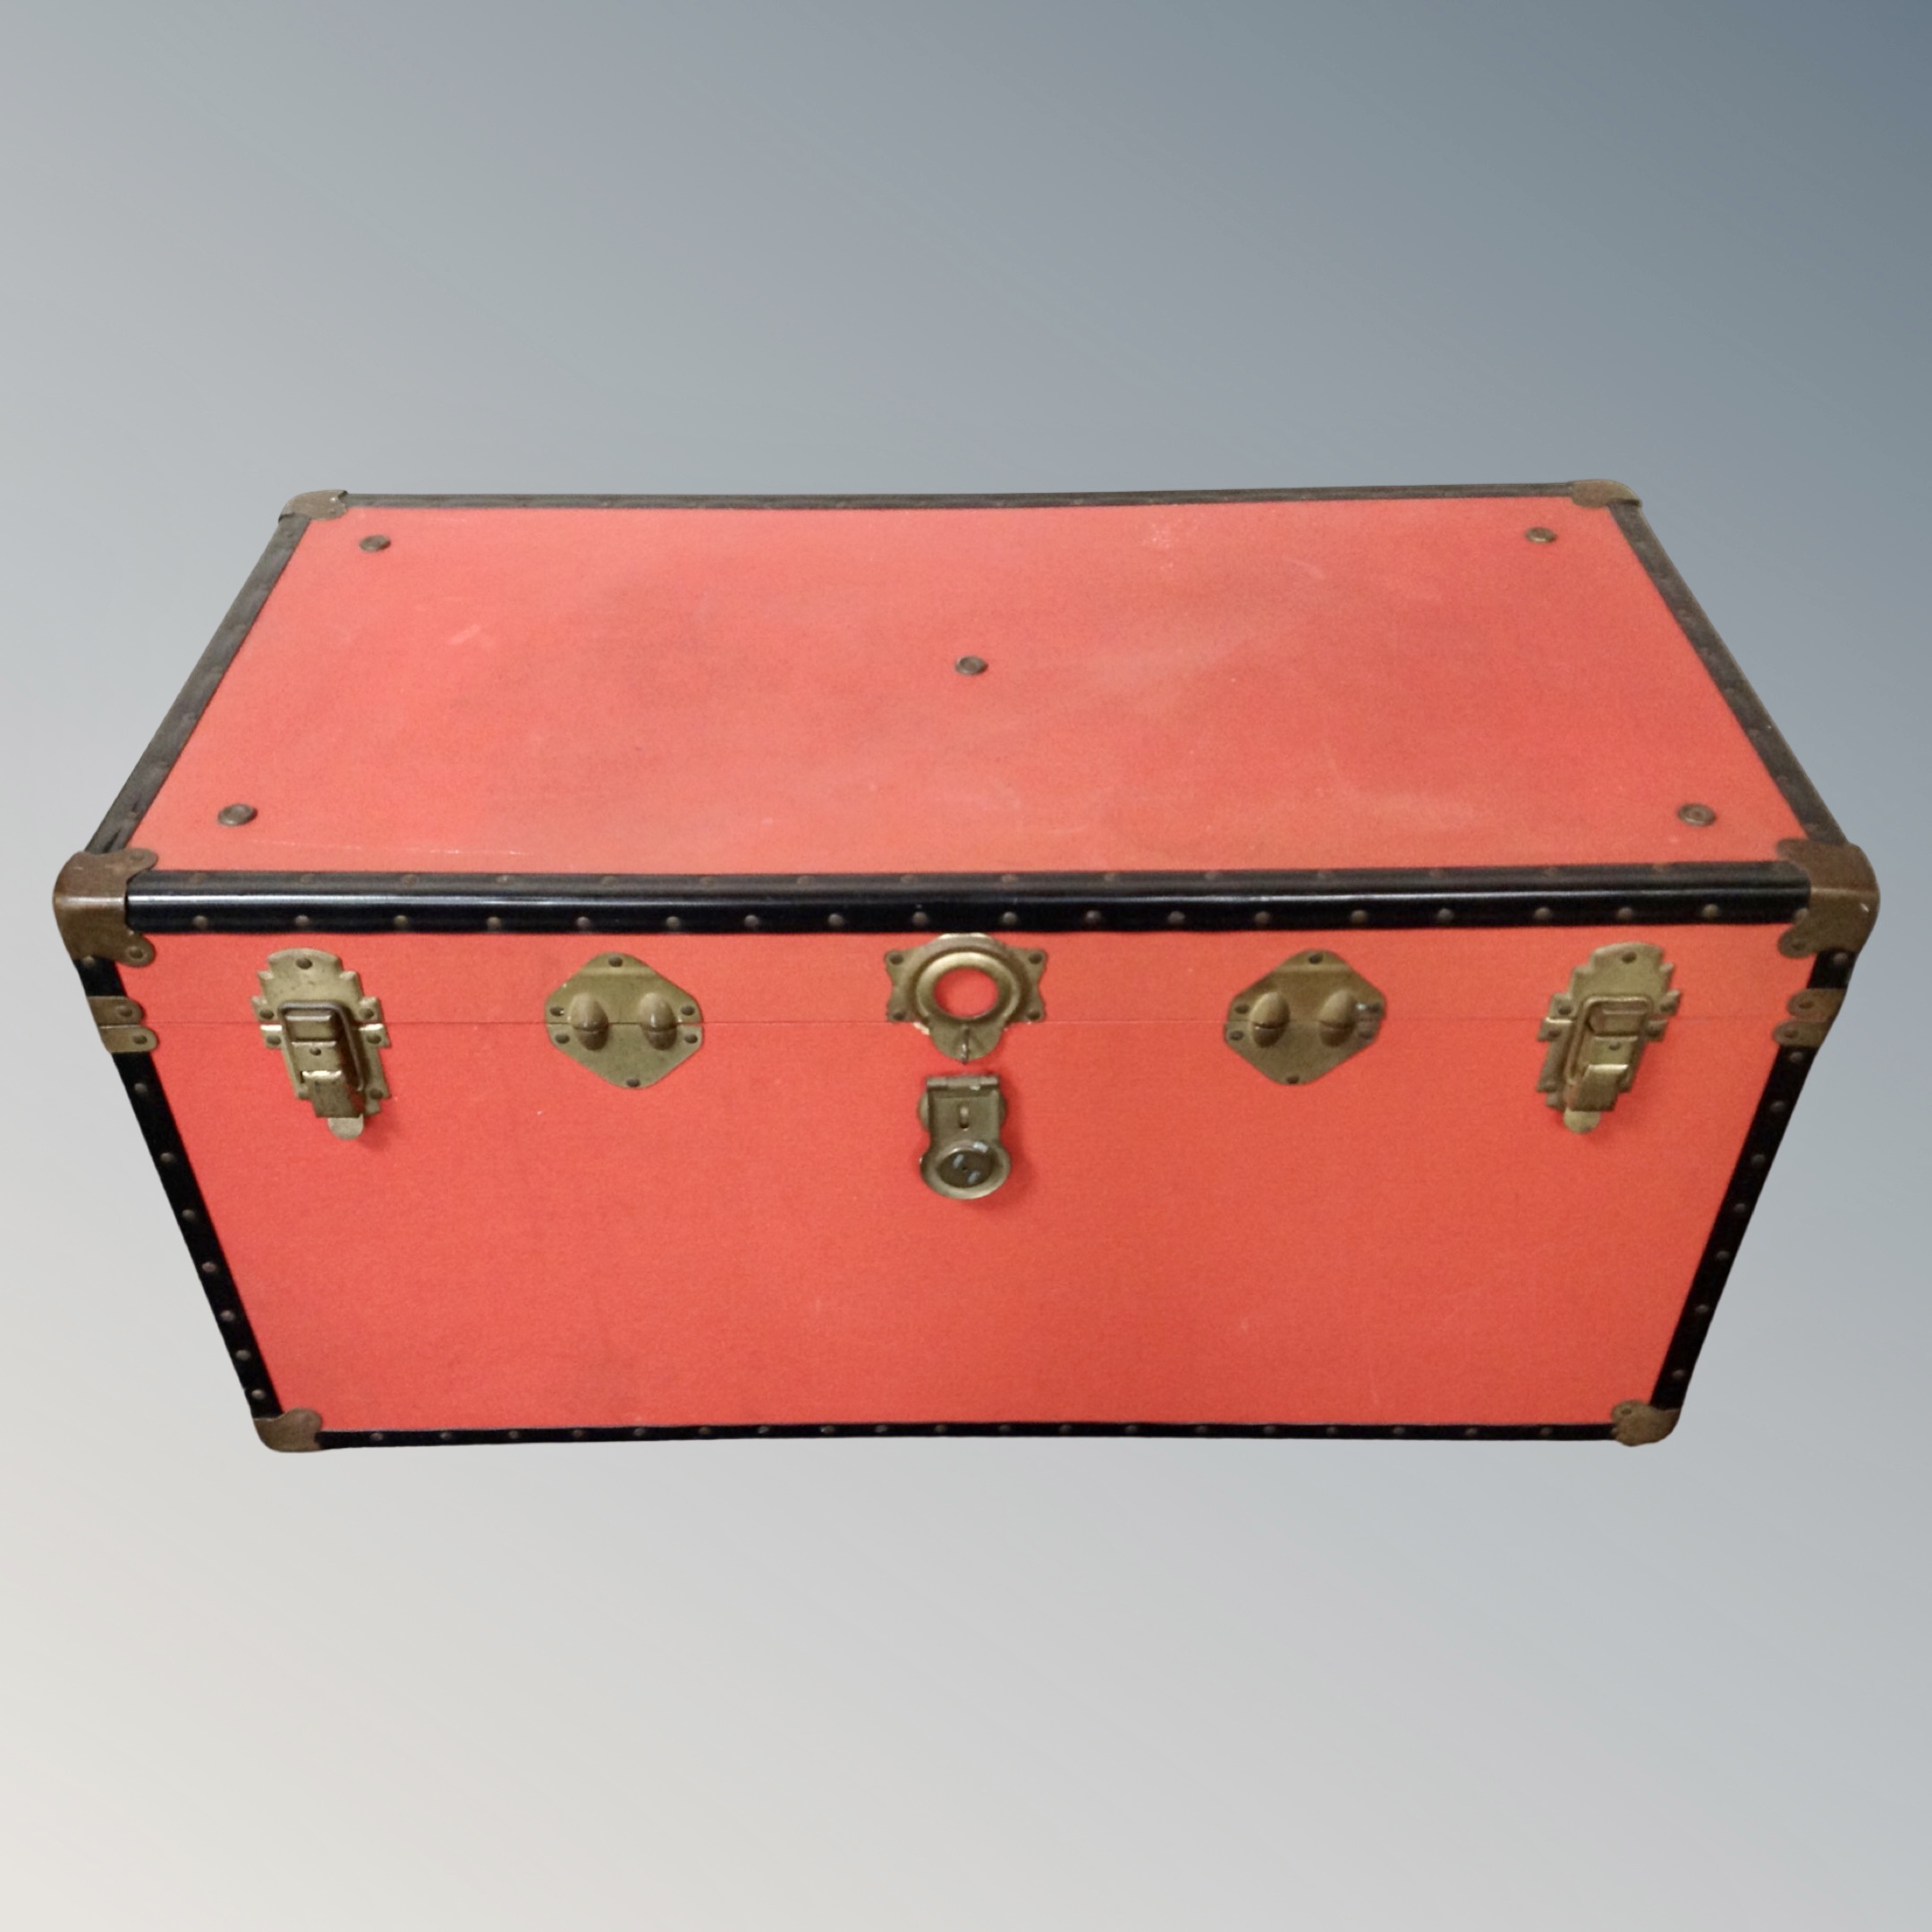 A shipping trunk.